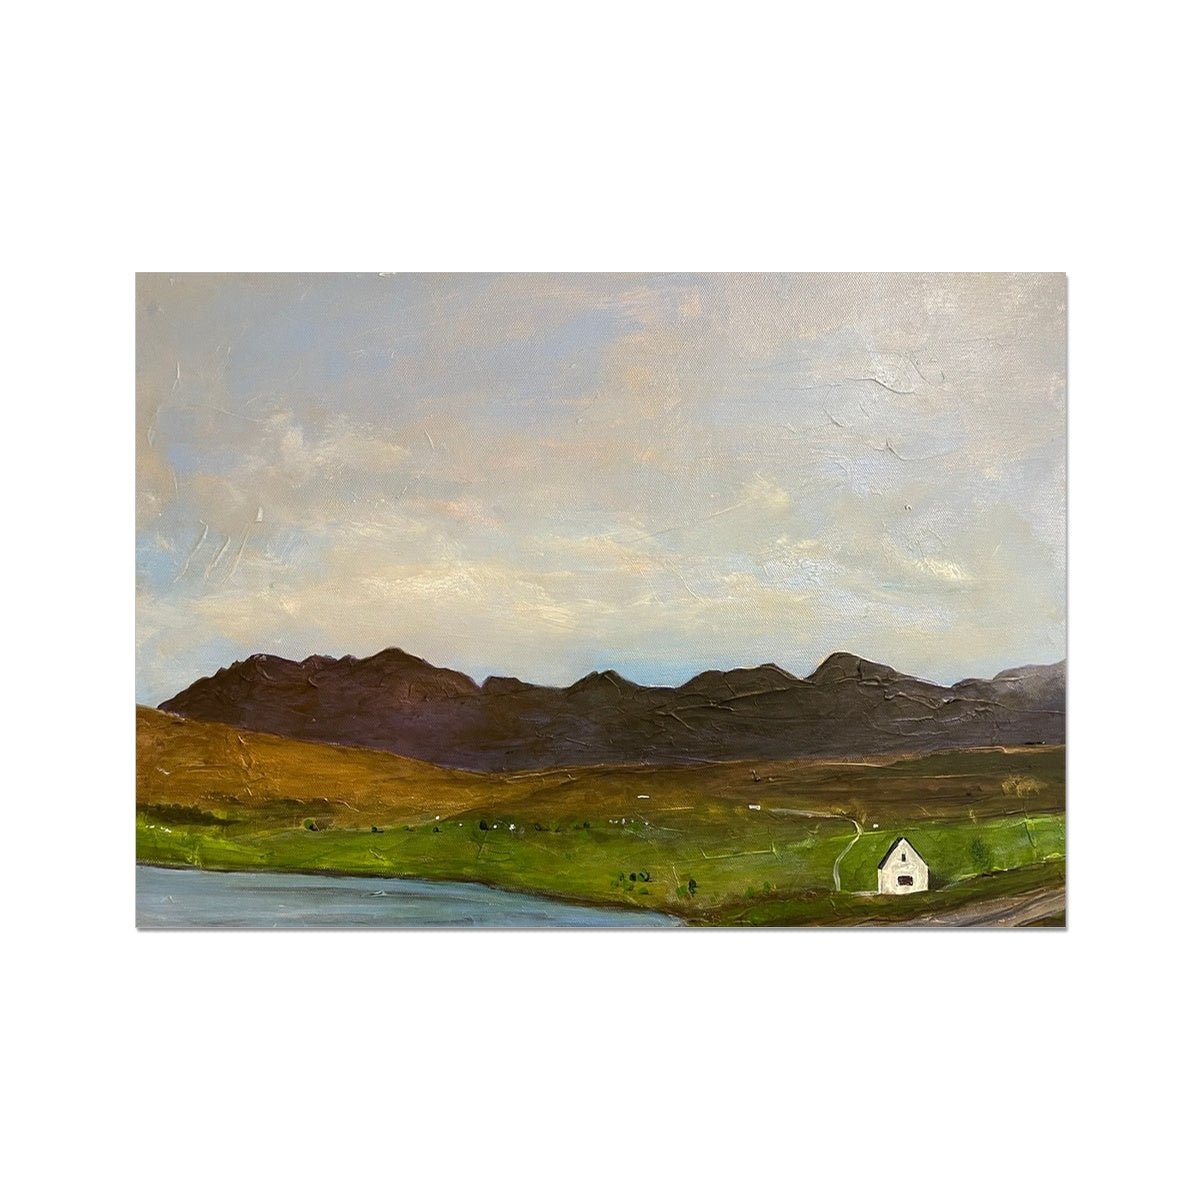 The Road To Carbost Skye Painting | Fine Art Prints From Scotland-Unframed Prints-Skye Art Gallery-A2 Landscape-Paintings, Prints, Homeware, Art Gifts From Scotland By Scottish Artist Kevin Hunter